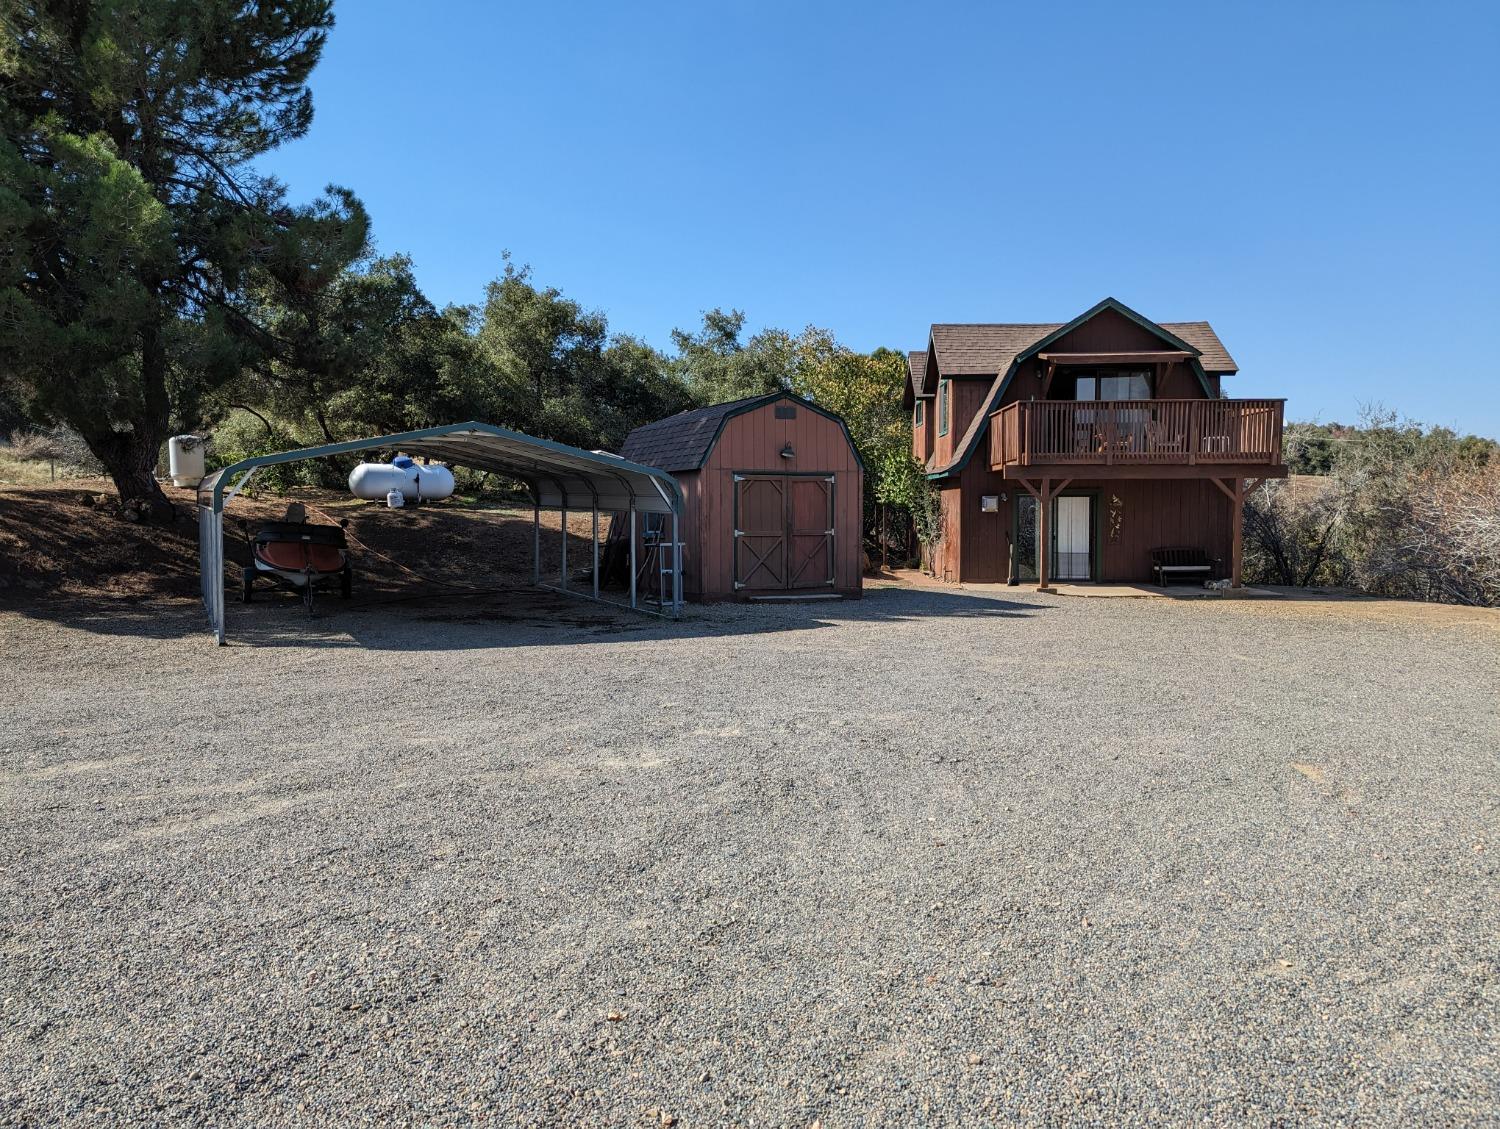 Photo of 50539 High Oaks Ln in Squaw Valley, CA